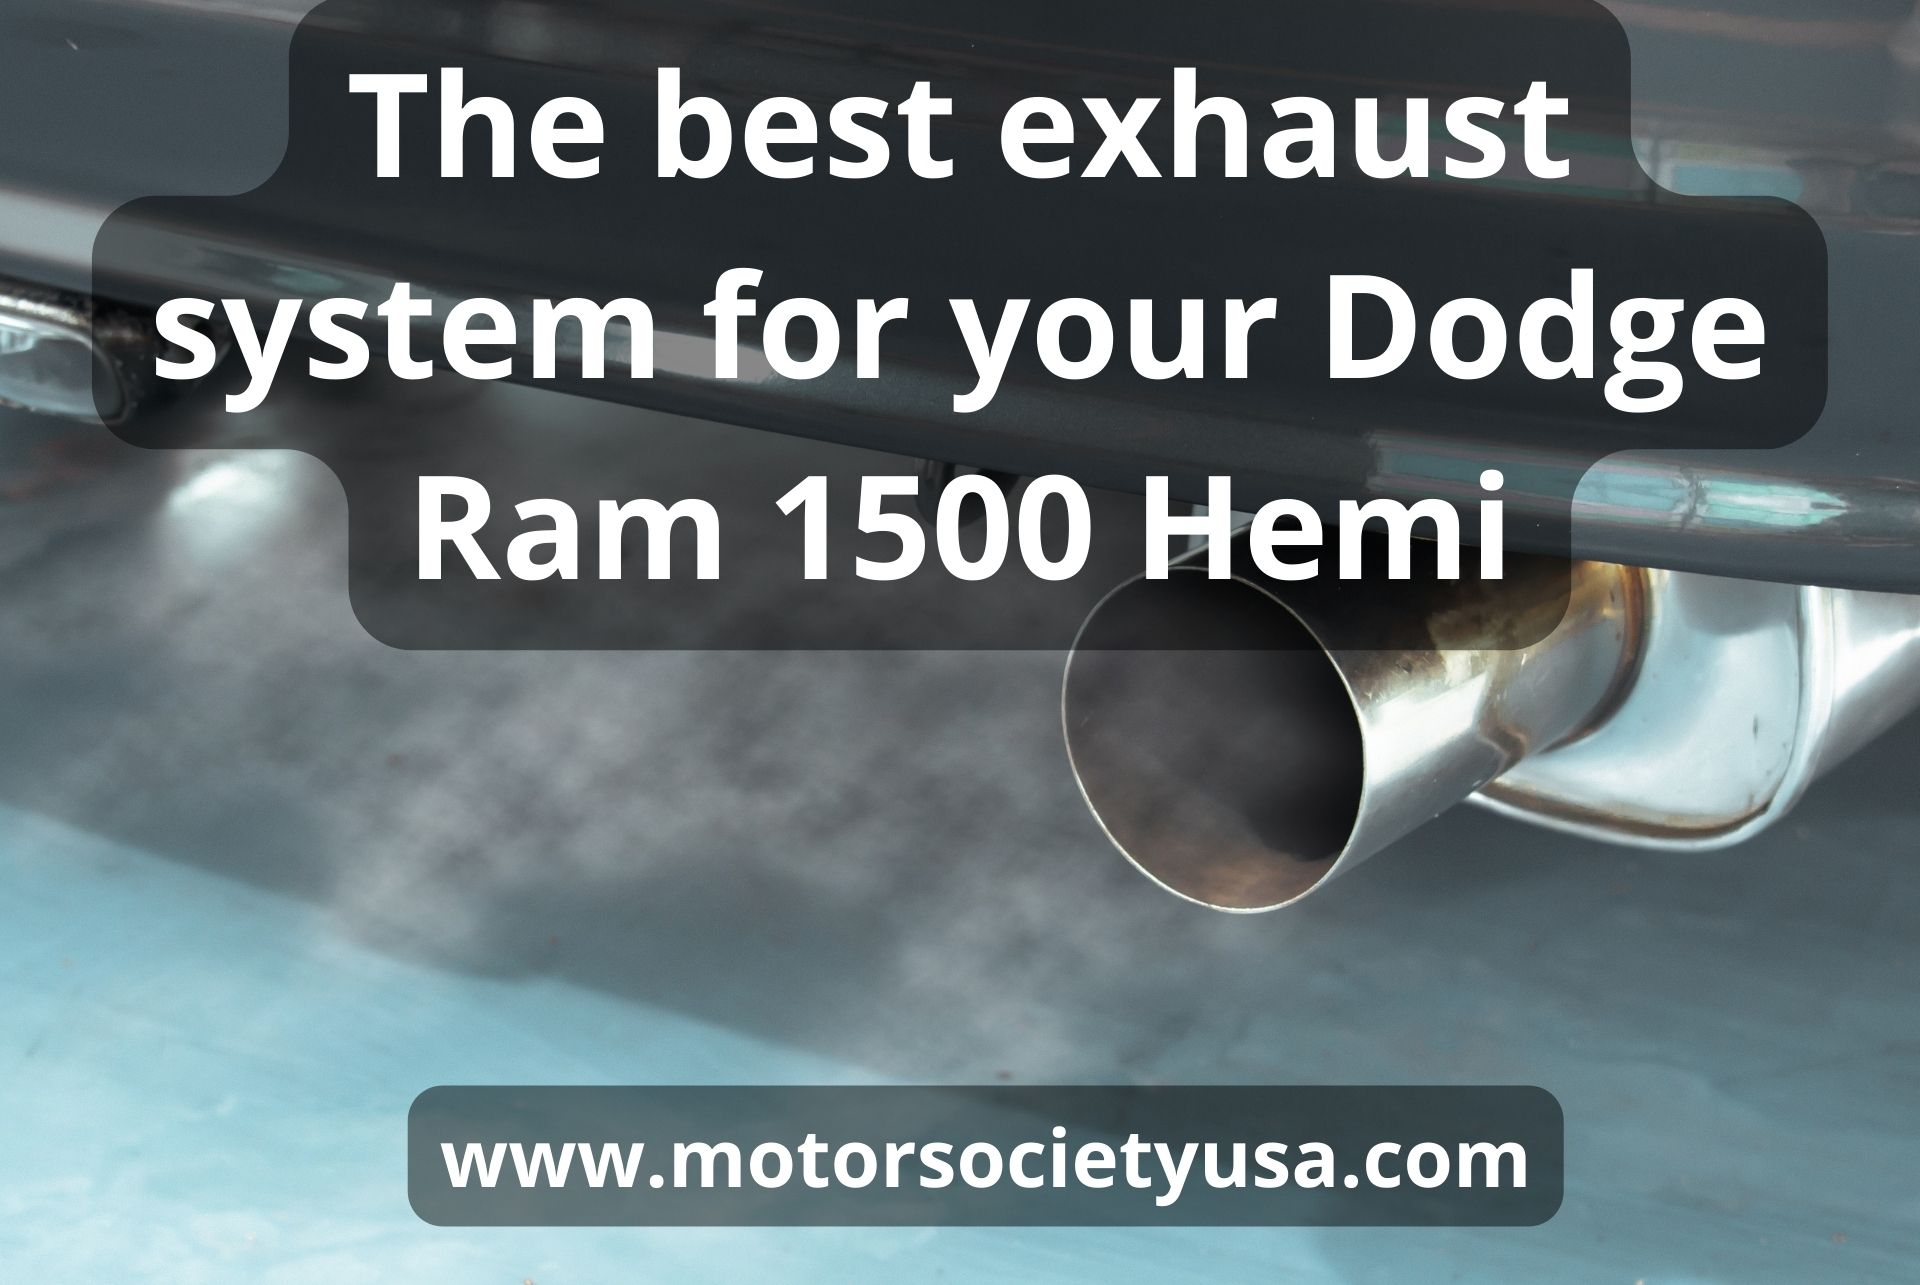 Top 5 the best exhaust system for Dodge Ram 1500 Hemi: guide